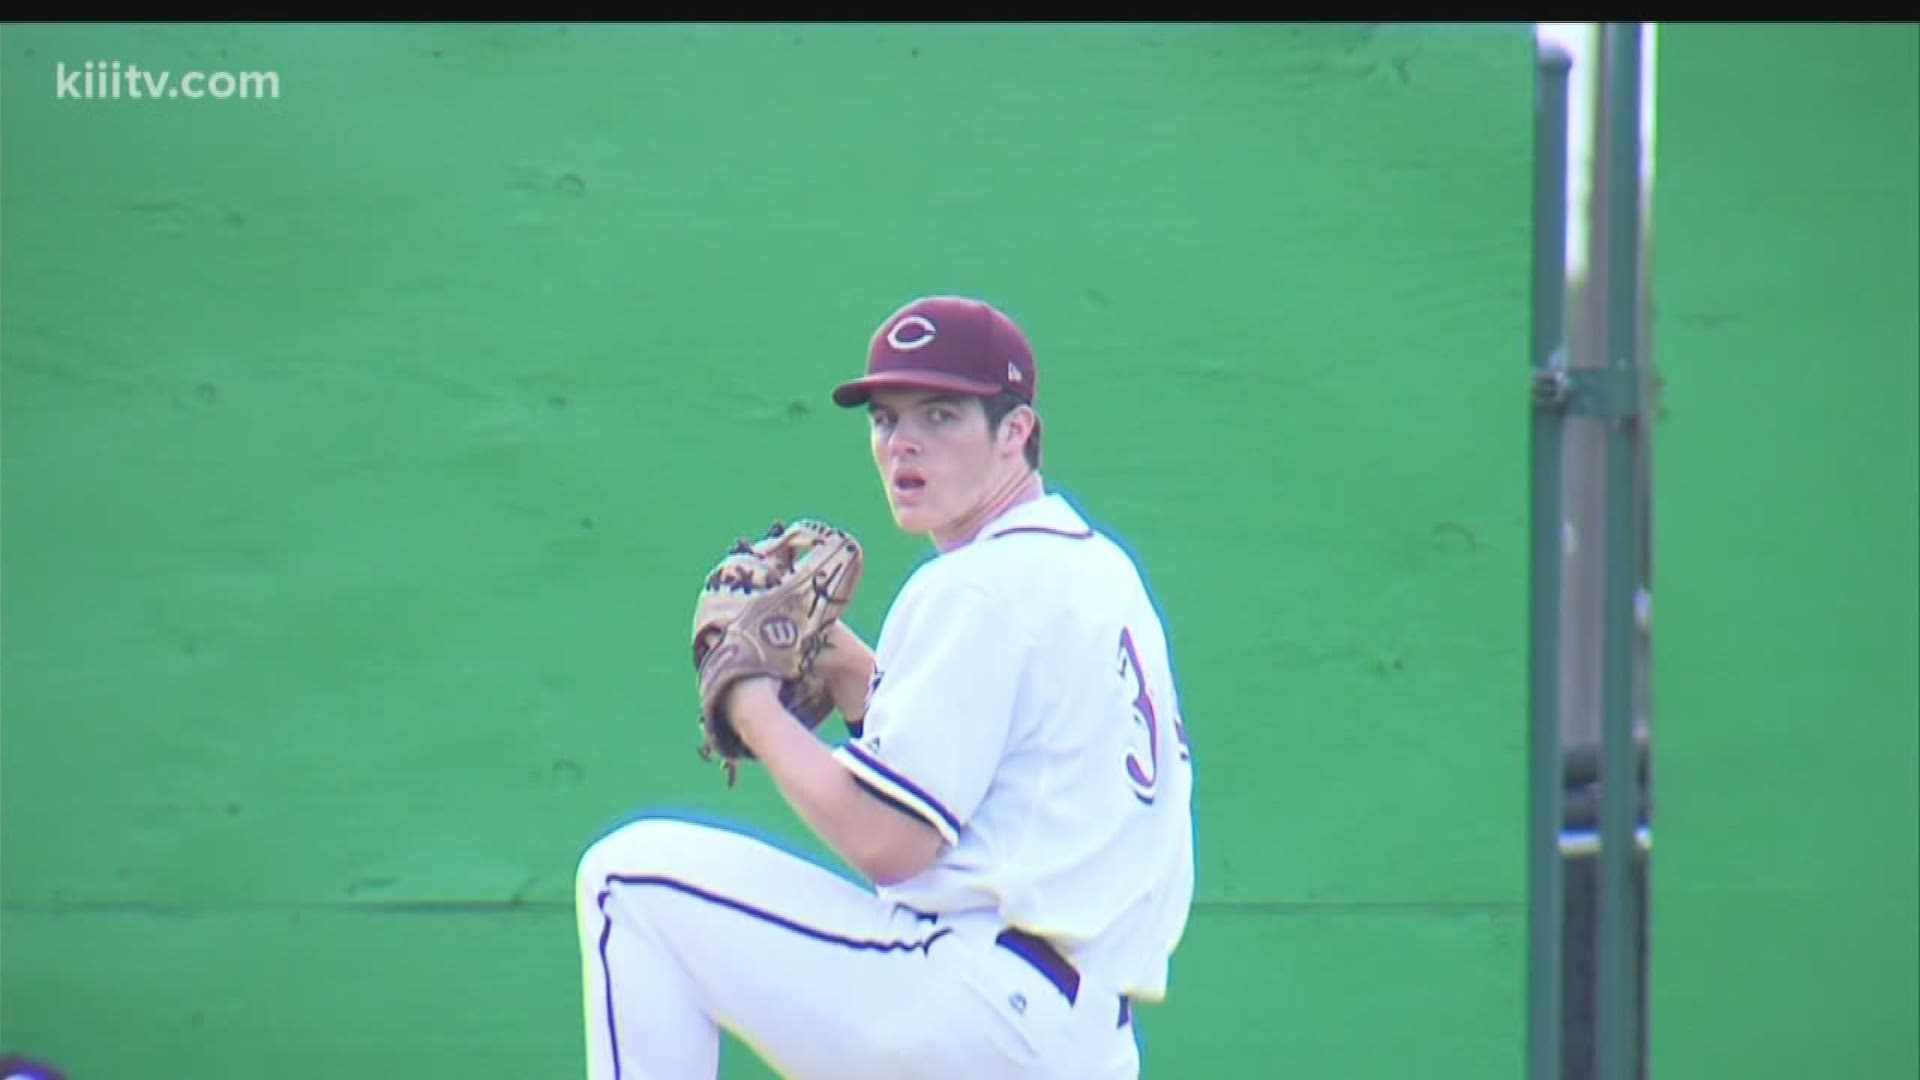 This week's 3News Athlete of the week is Calallen's Hambleton Oliver. 